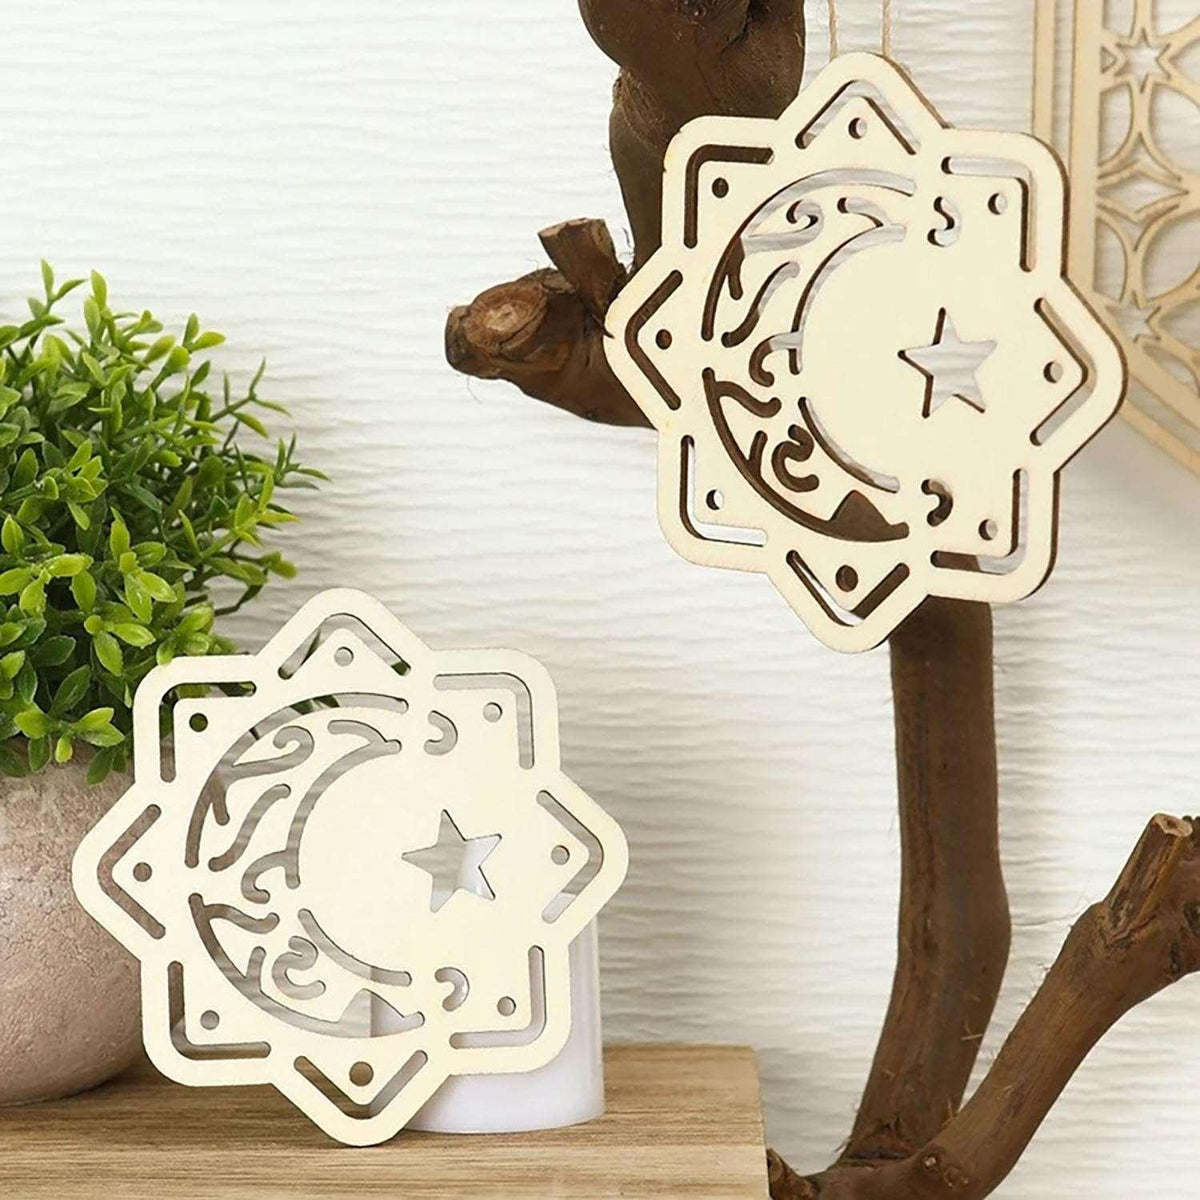 Haoser Set of 10 Eid Special Wooden Pendants, Islamic Festival Decorations, Crescent Moon and Star Design, Handcrafted Eid Mubarak Gifts, Wooden Eid Ornaments, Ramadan and Eid Home Decor (DGN-5) - Haoser